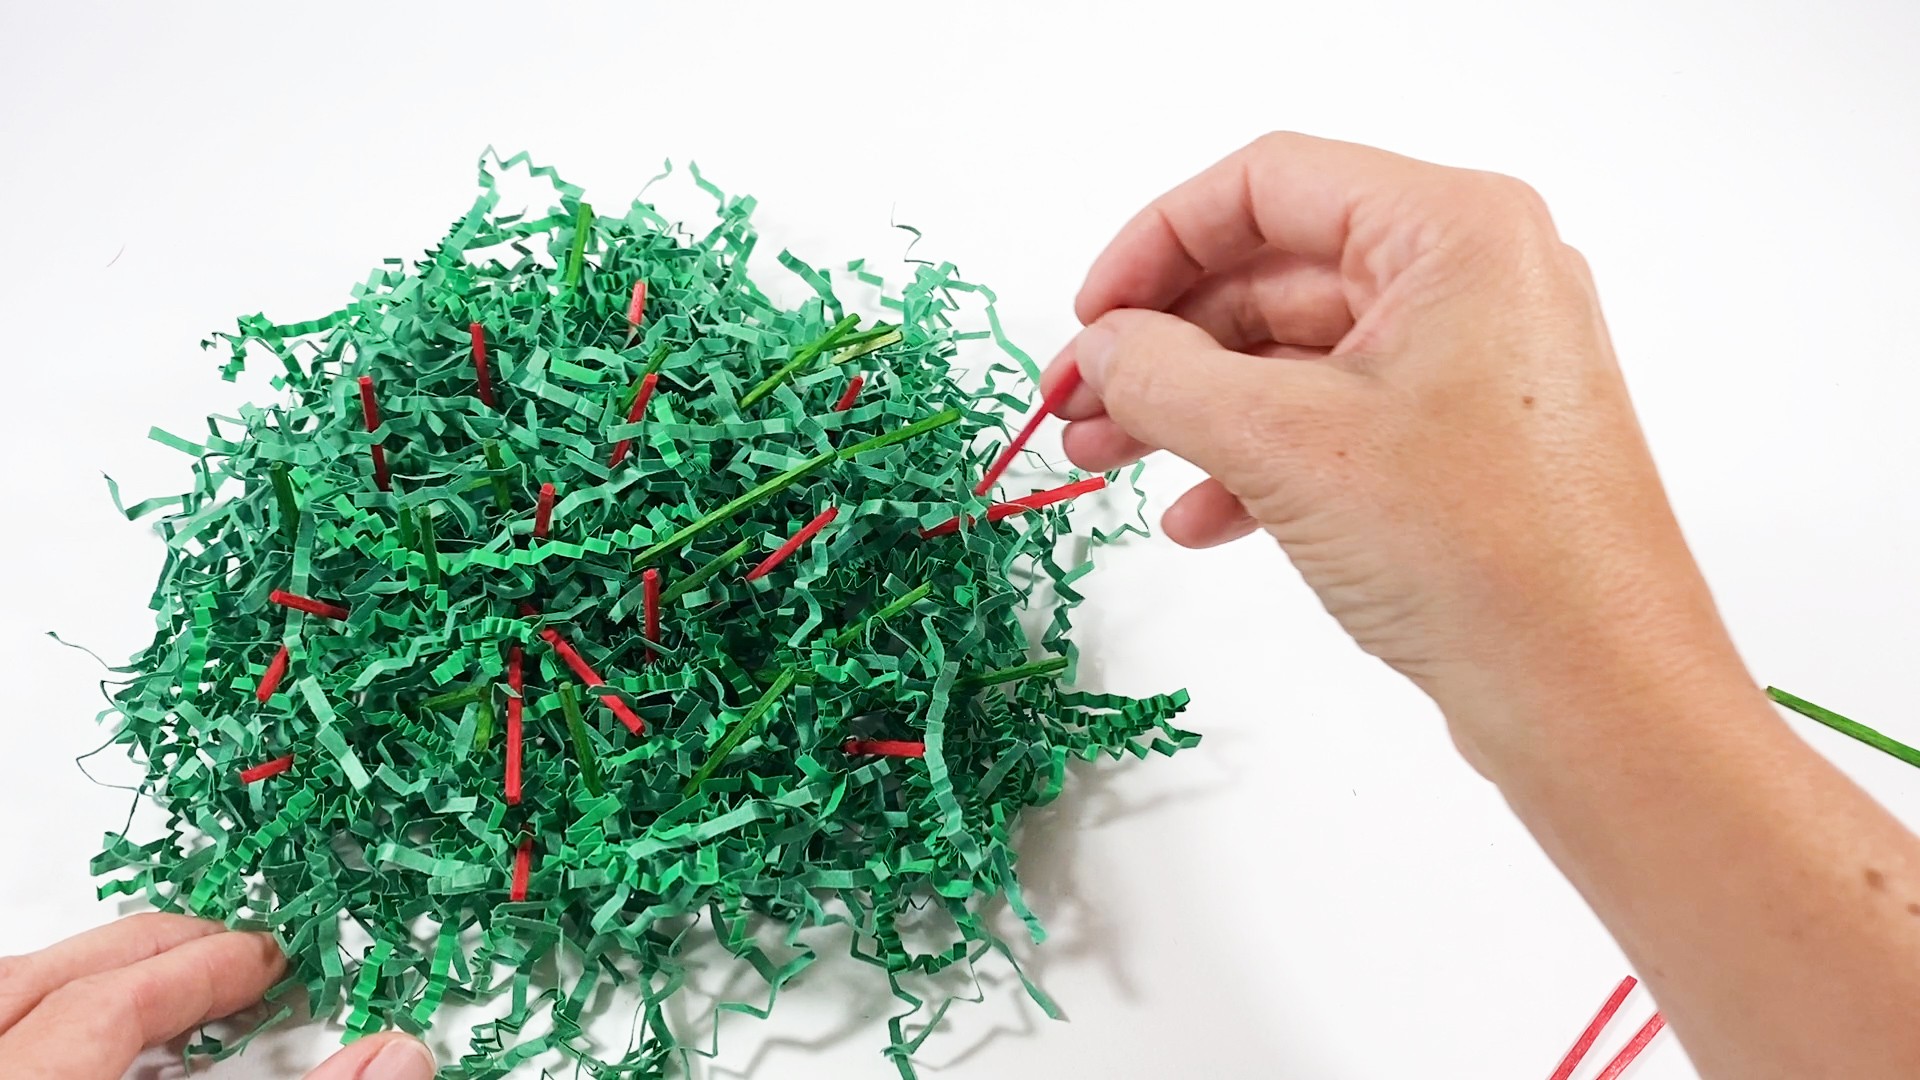 Green paper shreds with green and red matchsticks hidden inside. A hand places a red matchstick into the paper shreds.